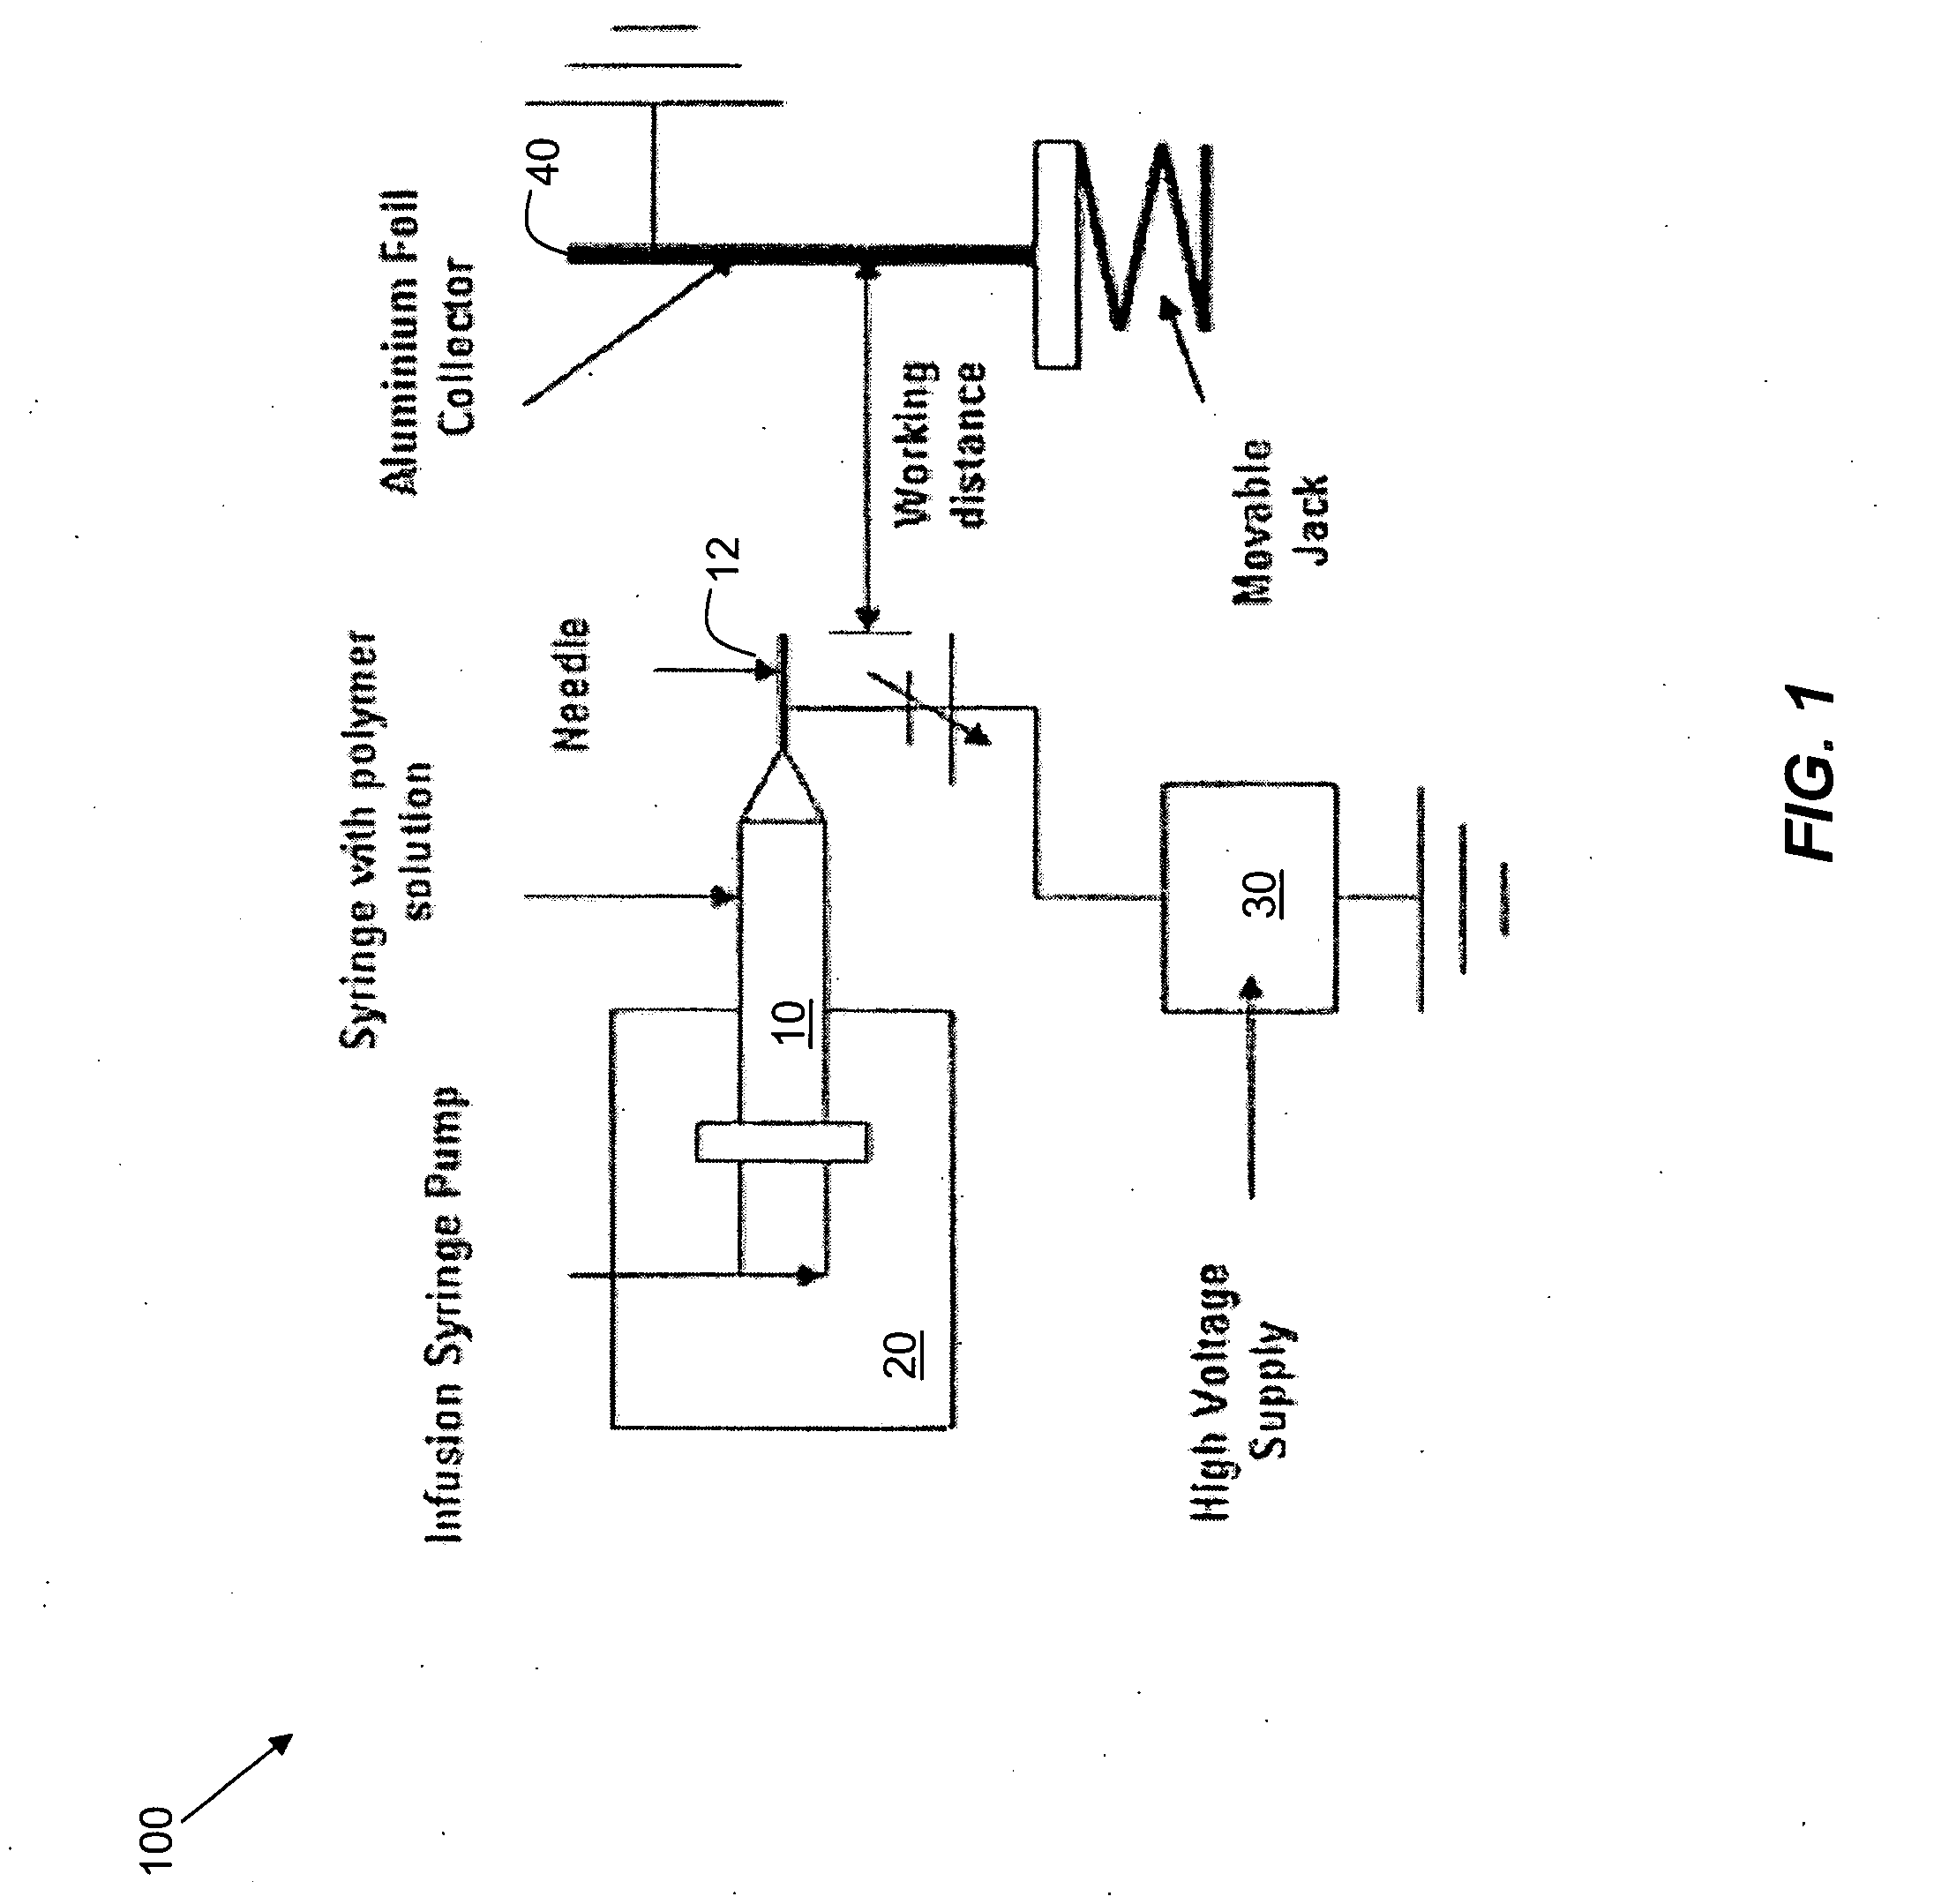 Process for preparing high stability, high activity coatings and processes for using same